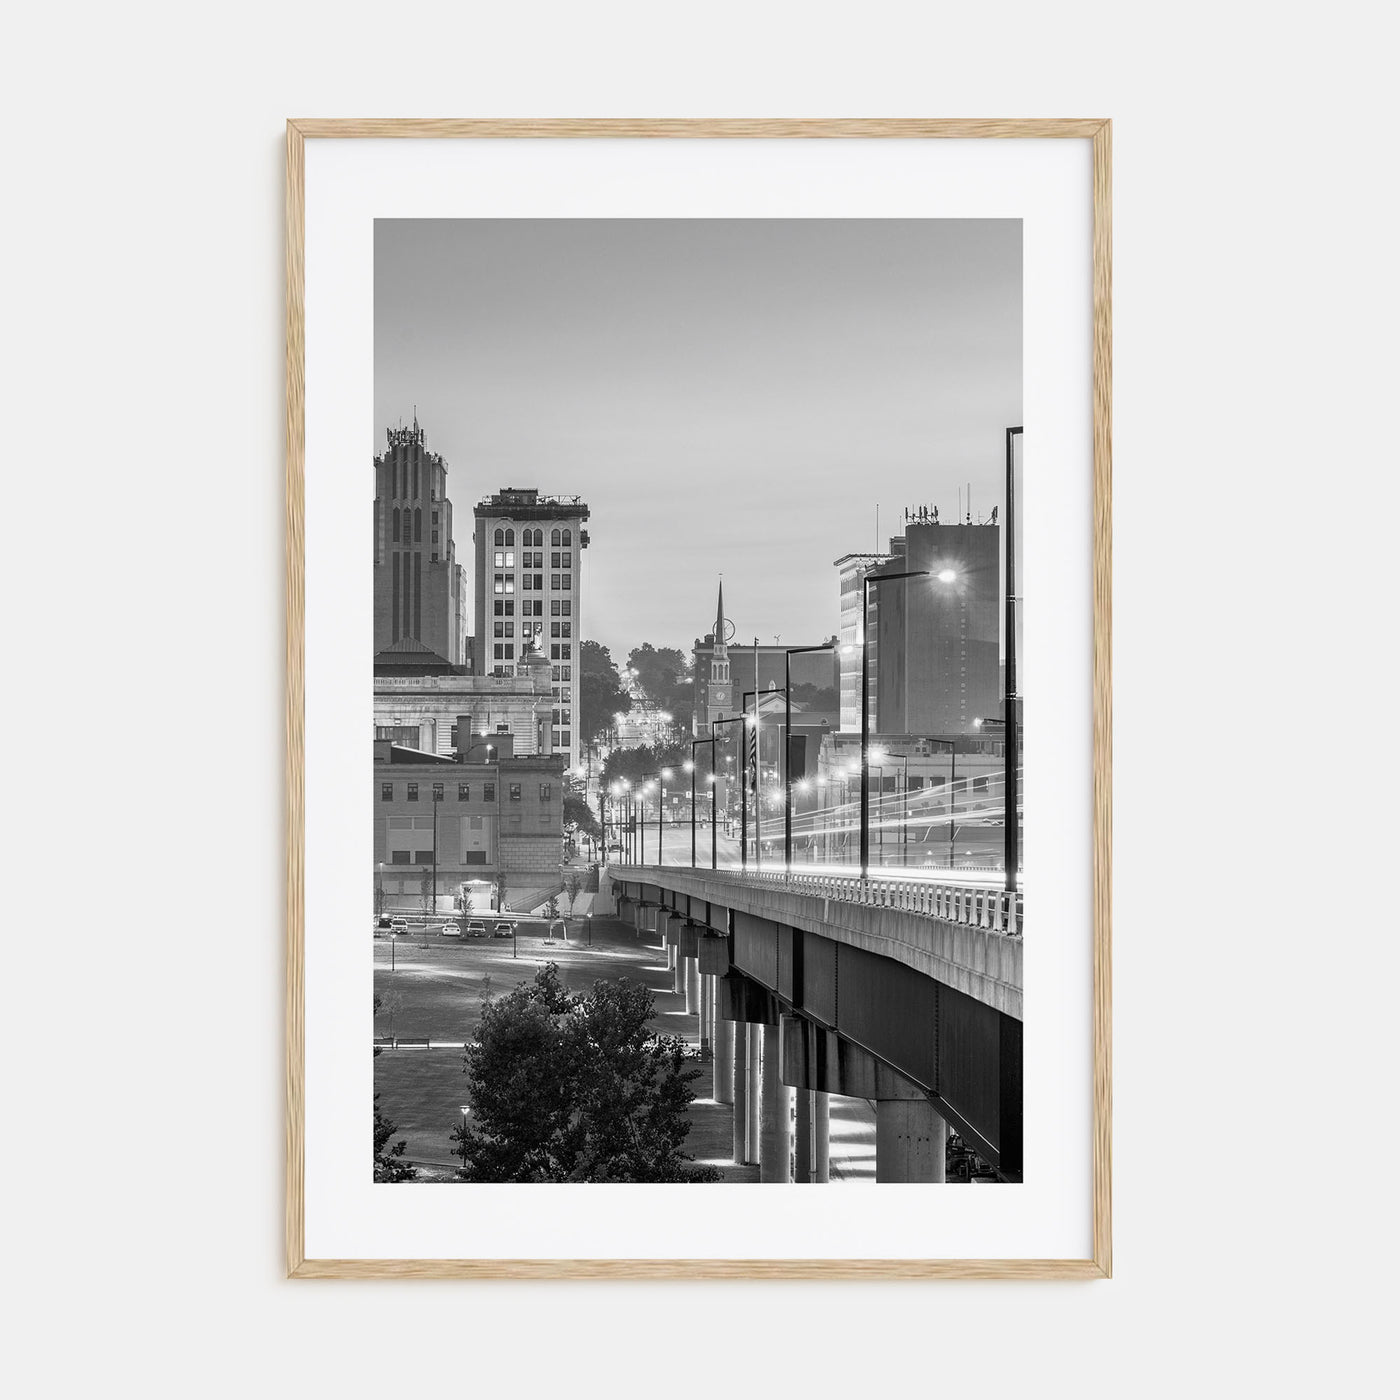 Youngstown Photo B&W Poster